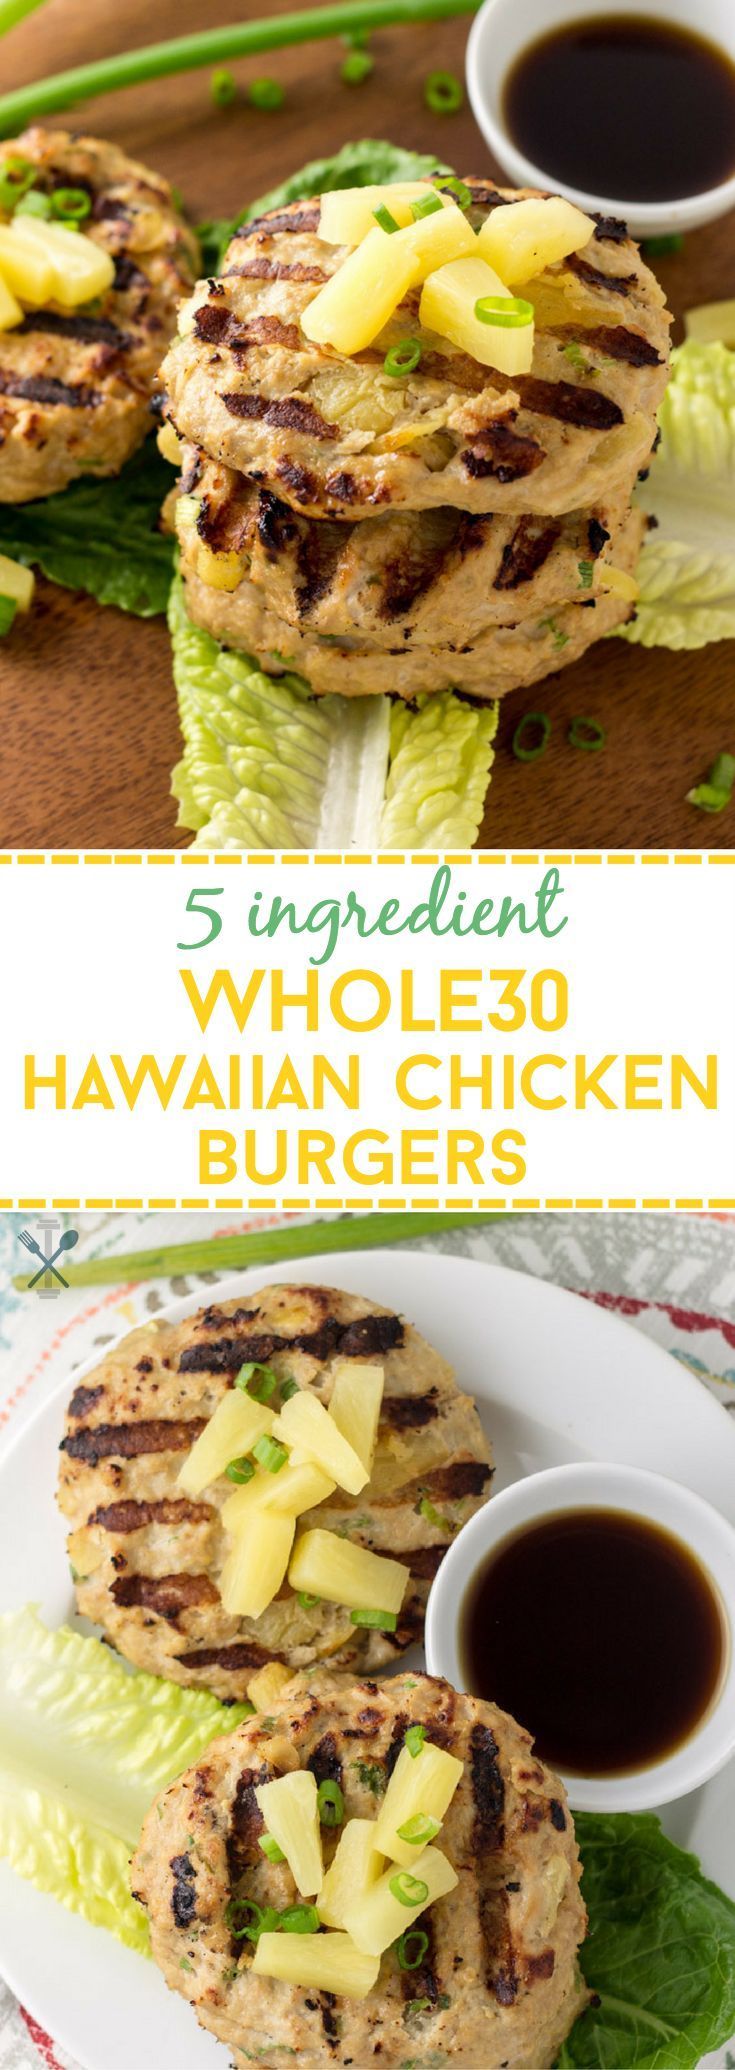 These Whole30 chicken burgers are made with only 5 ingredients, and bursting with flavor. Ground chicken with diced pineapples and